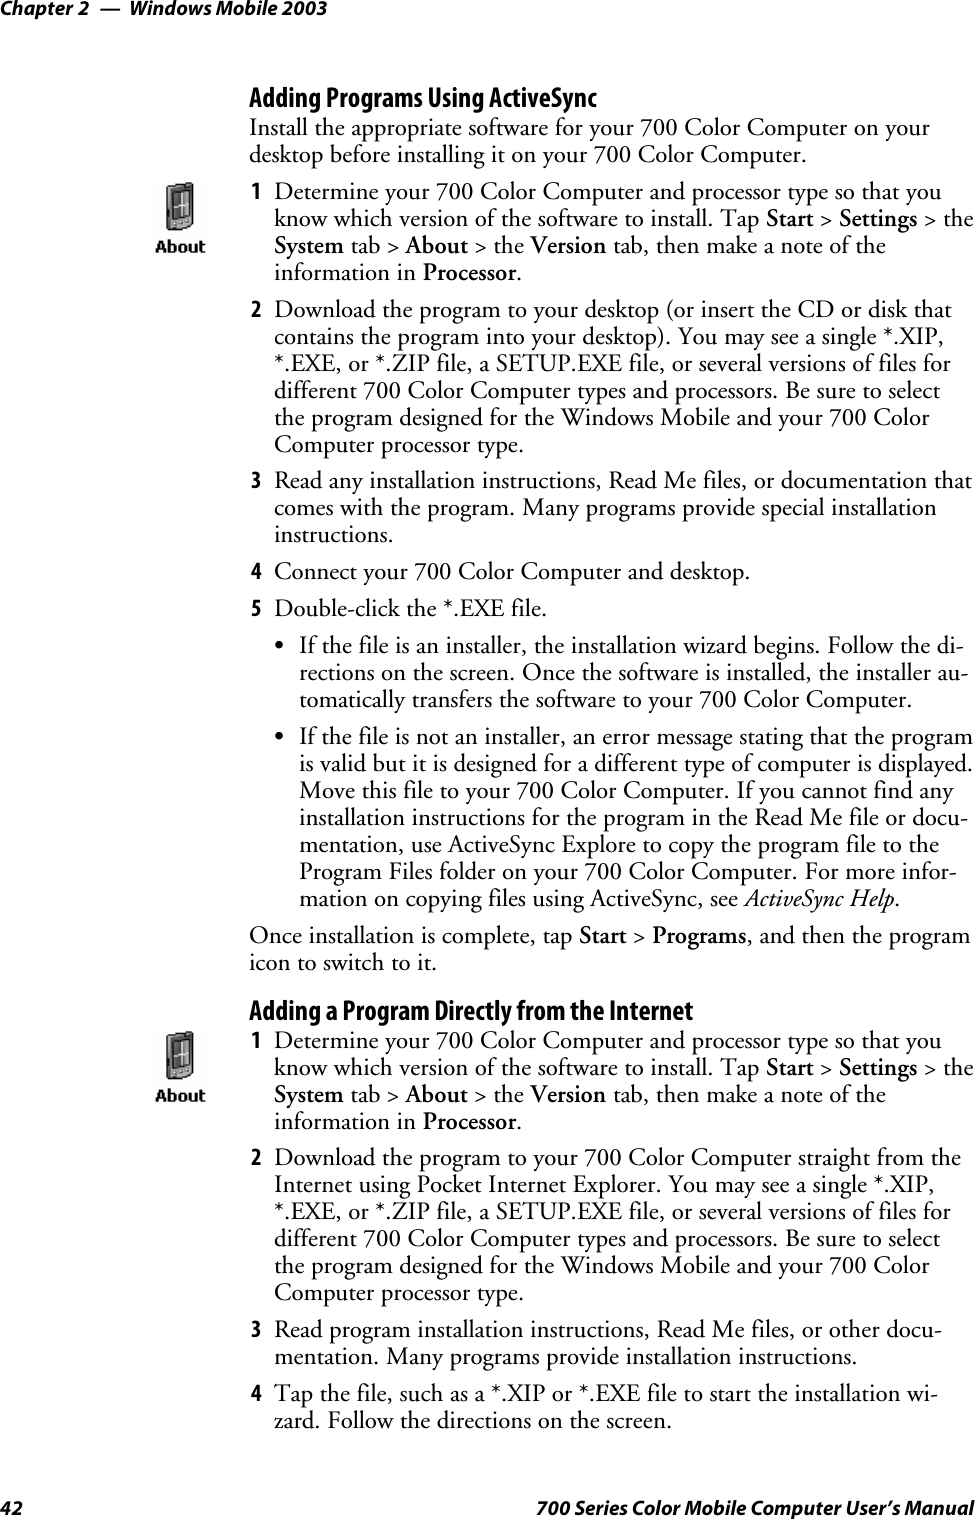 Windows Mobile 2003Chapter —242 700 Series Color Mobile Computer User’s ManualAdding Programs Using ActiveSyncInstall the appropriate software for your 700 Color Computer on yourdesktop before installing it on your 700 Color Computer.1Determine your 700 Color Computer and processor type so that youknow which version of the software to install. Tap Start &gt;Settings &gt;theSystem tab &gt; About &gt;theVersion tab, then make a note of theinformation in Processor.2Download the program to your desktop (or insert the CD or disk thatcontains the program into your desktop). You may see a single *.XIP,*.EXE, or *.ZIP file, a SETUP.EXE file, or several versions of files fordifferent 700 Color Computer types and processors. Be sure to selectthe program designed for the Windows Mobile and your 700 ColorComputer processor type.3Read any installation instructions, Read Me files, or documentation thatcomes with the program. Many programs provide special installationinstructions.4Connect your 700 Color Computer and desktop.5Double-click the *.EXE file.SIf the file is an installer, the installation wizard begins. Follow the di-rections on the screen. Once the software is installed, the installer au-tomatically transfers the software to your 700 Color Computer.SIf the file is not an installer, an error message stating that the programis valid but it is designed for a different type of computer is displayed.Move this file to your 700 Color Computer. If you cannot find anyinstallation instructions for the program in the Read Me file or docu-mentation, use ActiveSync Explore to copy the program file to theProgram Files folder on your 700 Color Computer. For more infor-mation on copying files using ActiveSync, see ActiveSync Help.Once installation is complete, tap Start &gt;Programs, and then the programicon to switch to it.Adding a Program Directly from the Internet1Determine your 700 Color Computer and processor type so that youknow which version of the software to install. Tap Start &gt;Settings &gt;theSystem tab &gt; About &gt;theVersion tab, then make a note of theinformation in Processor.2Download the program to your 700 Color Computer straight from theInternet using Pocket Internet Explorer. You may see a single *.XIP,*.EXE, or *.ZIP file, a SETUP.EXE file, or several versions of files fordifferent 700 Color Computer types and processors. Be sure to selectthe program designed for the Windows Mobile and your 700 ColorComputer processor type.3Read program installation instructions, Read Me files, or other docu-mentation. Many programs provide installation instructions.4Tap the file, such as a *.XIP or *.EXE file to start the installation wi-zard. Follow the directions on the screen.